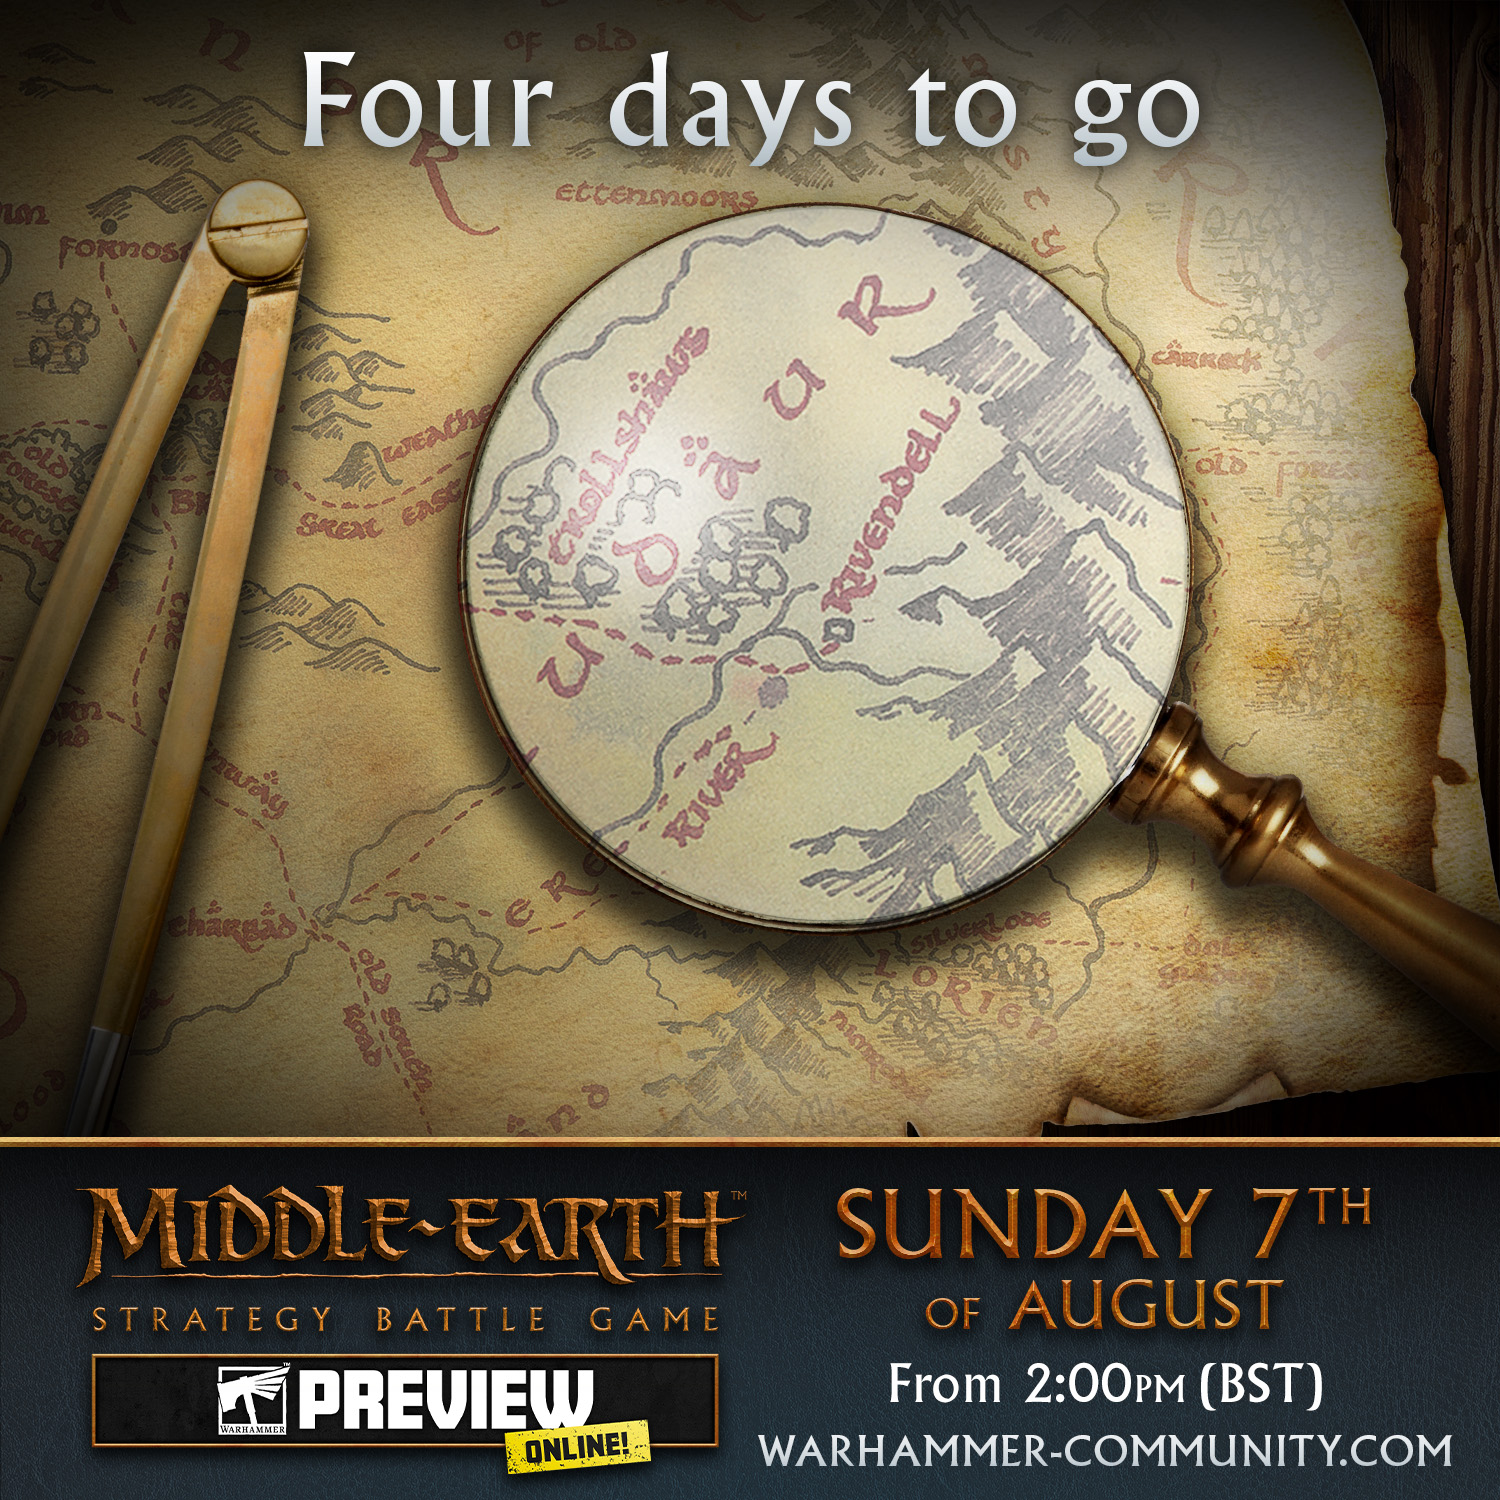 Middle-earth Strategy Battle Game Preview - Games Workshop